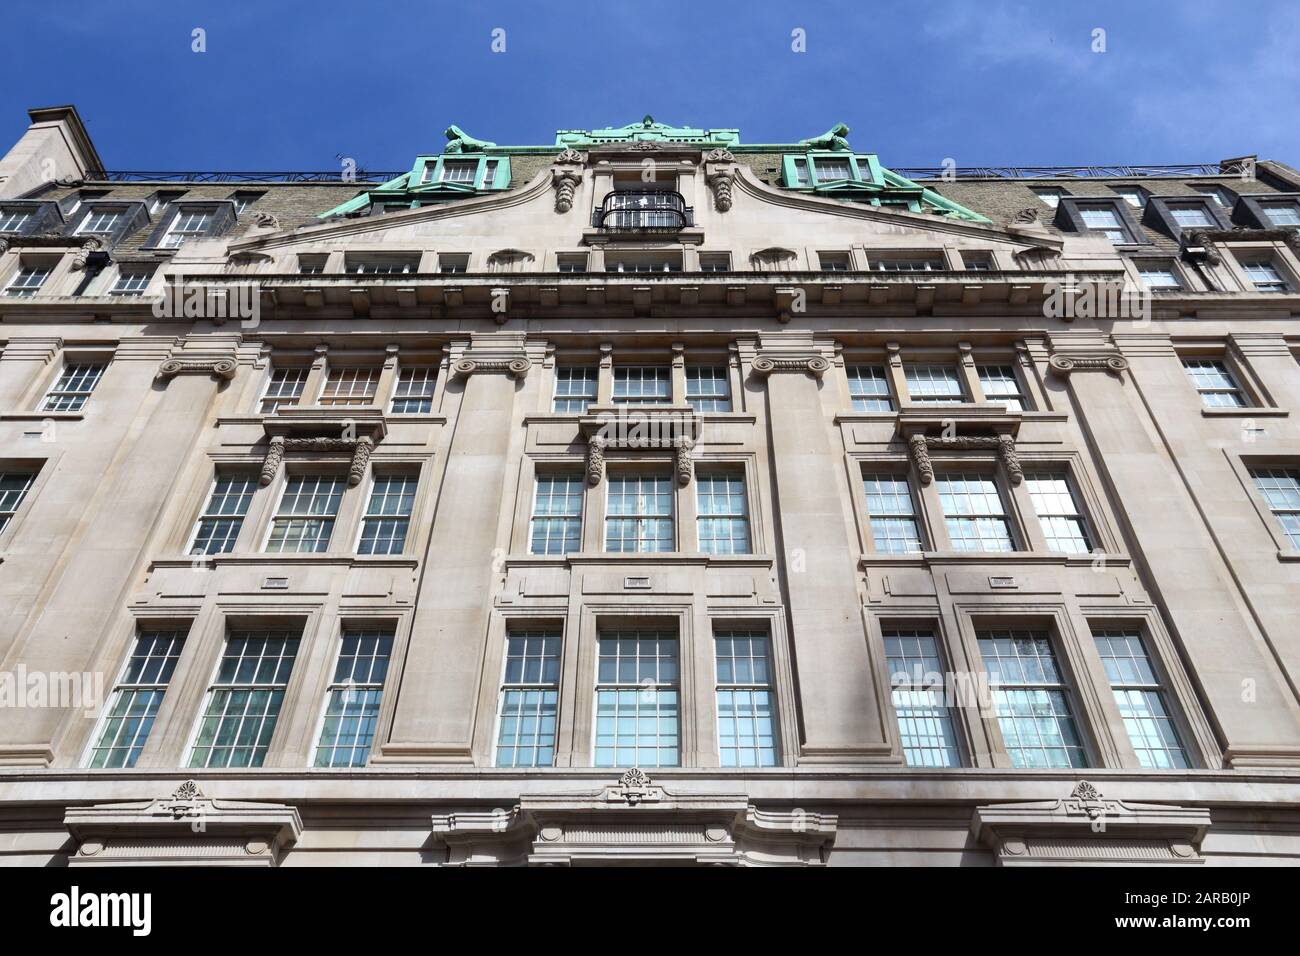 LONDON, UK - JULY 6, 2016: Hallmark Building in the City of London. The classical architecture has been redeveloped by Orms. Law firm Weightmans has a Stock Photo